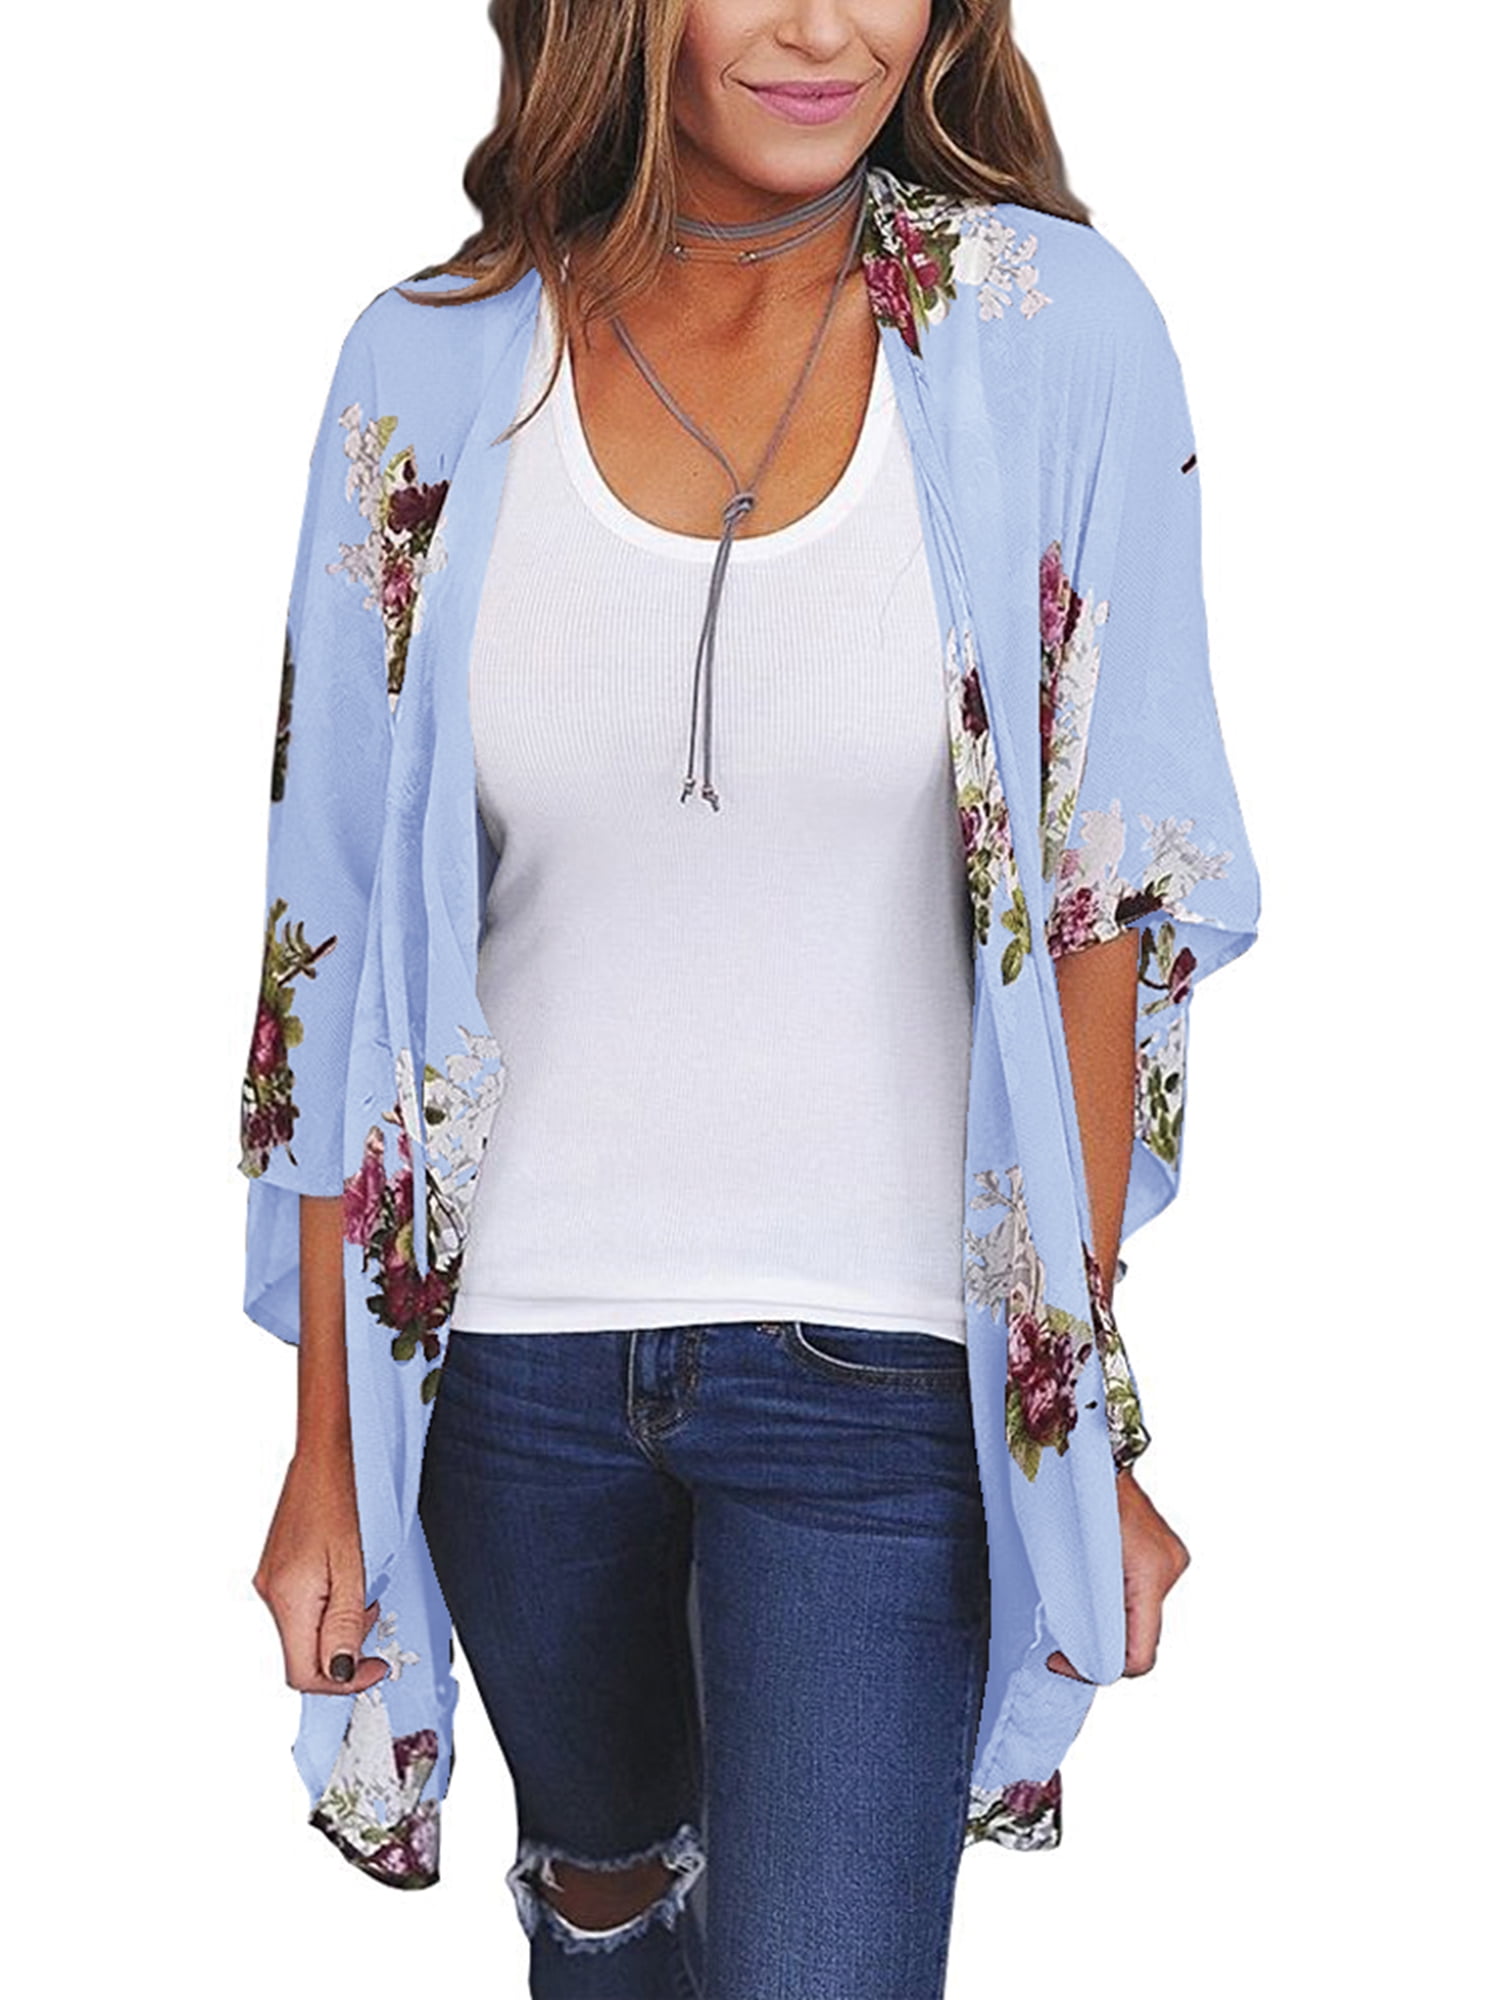 3/4 Sleeve Cardigan Tops for Women Summer Casual Beach Tunic Shirts Loose Fit Chiffon Comfy Blouses Tees